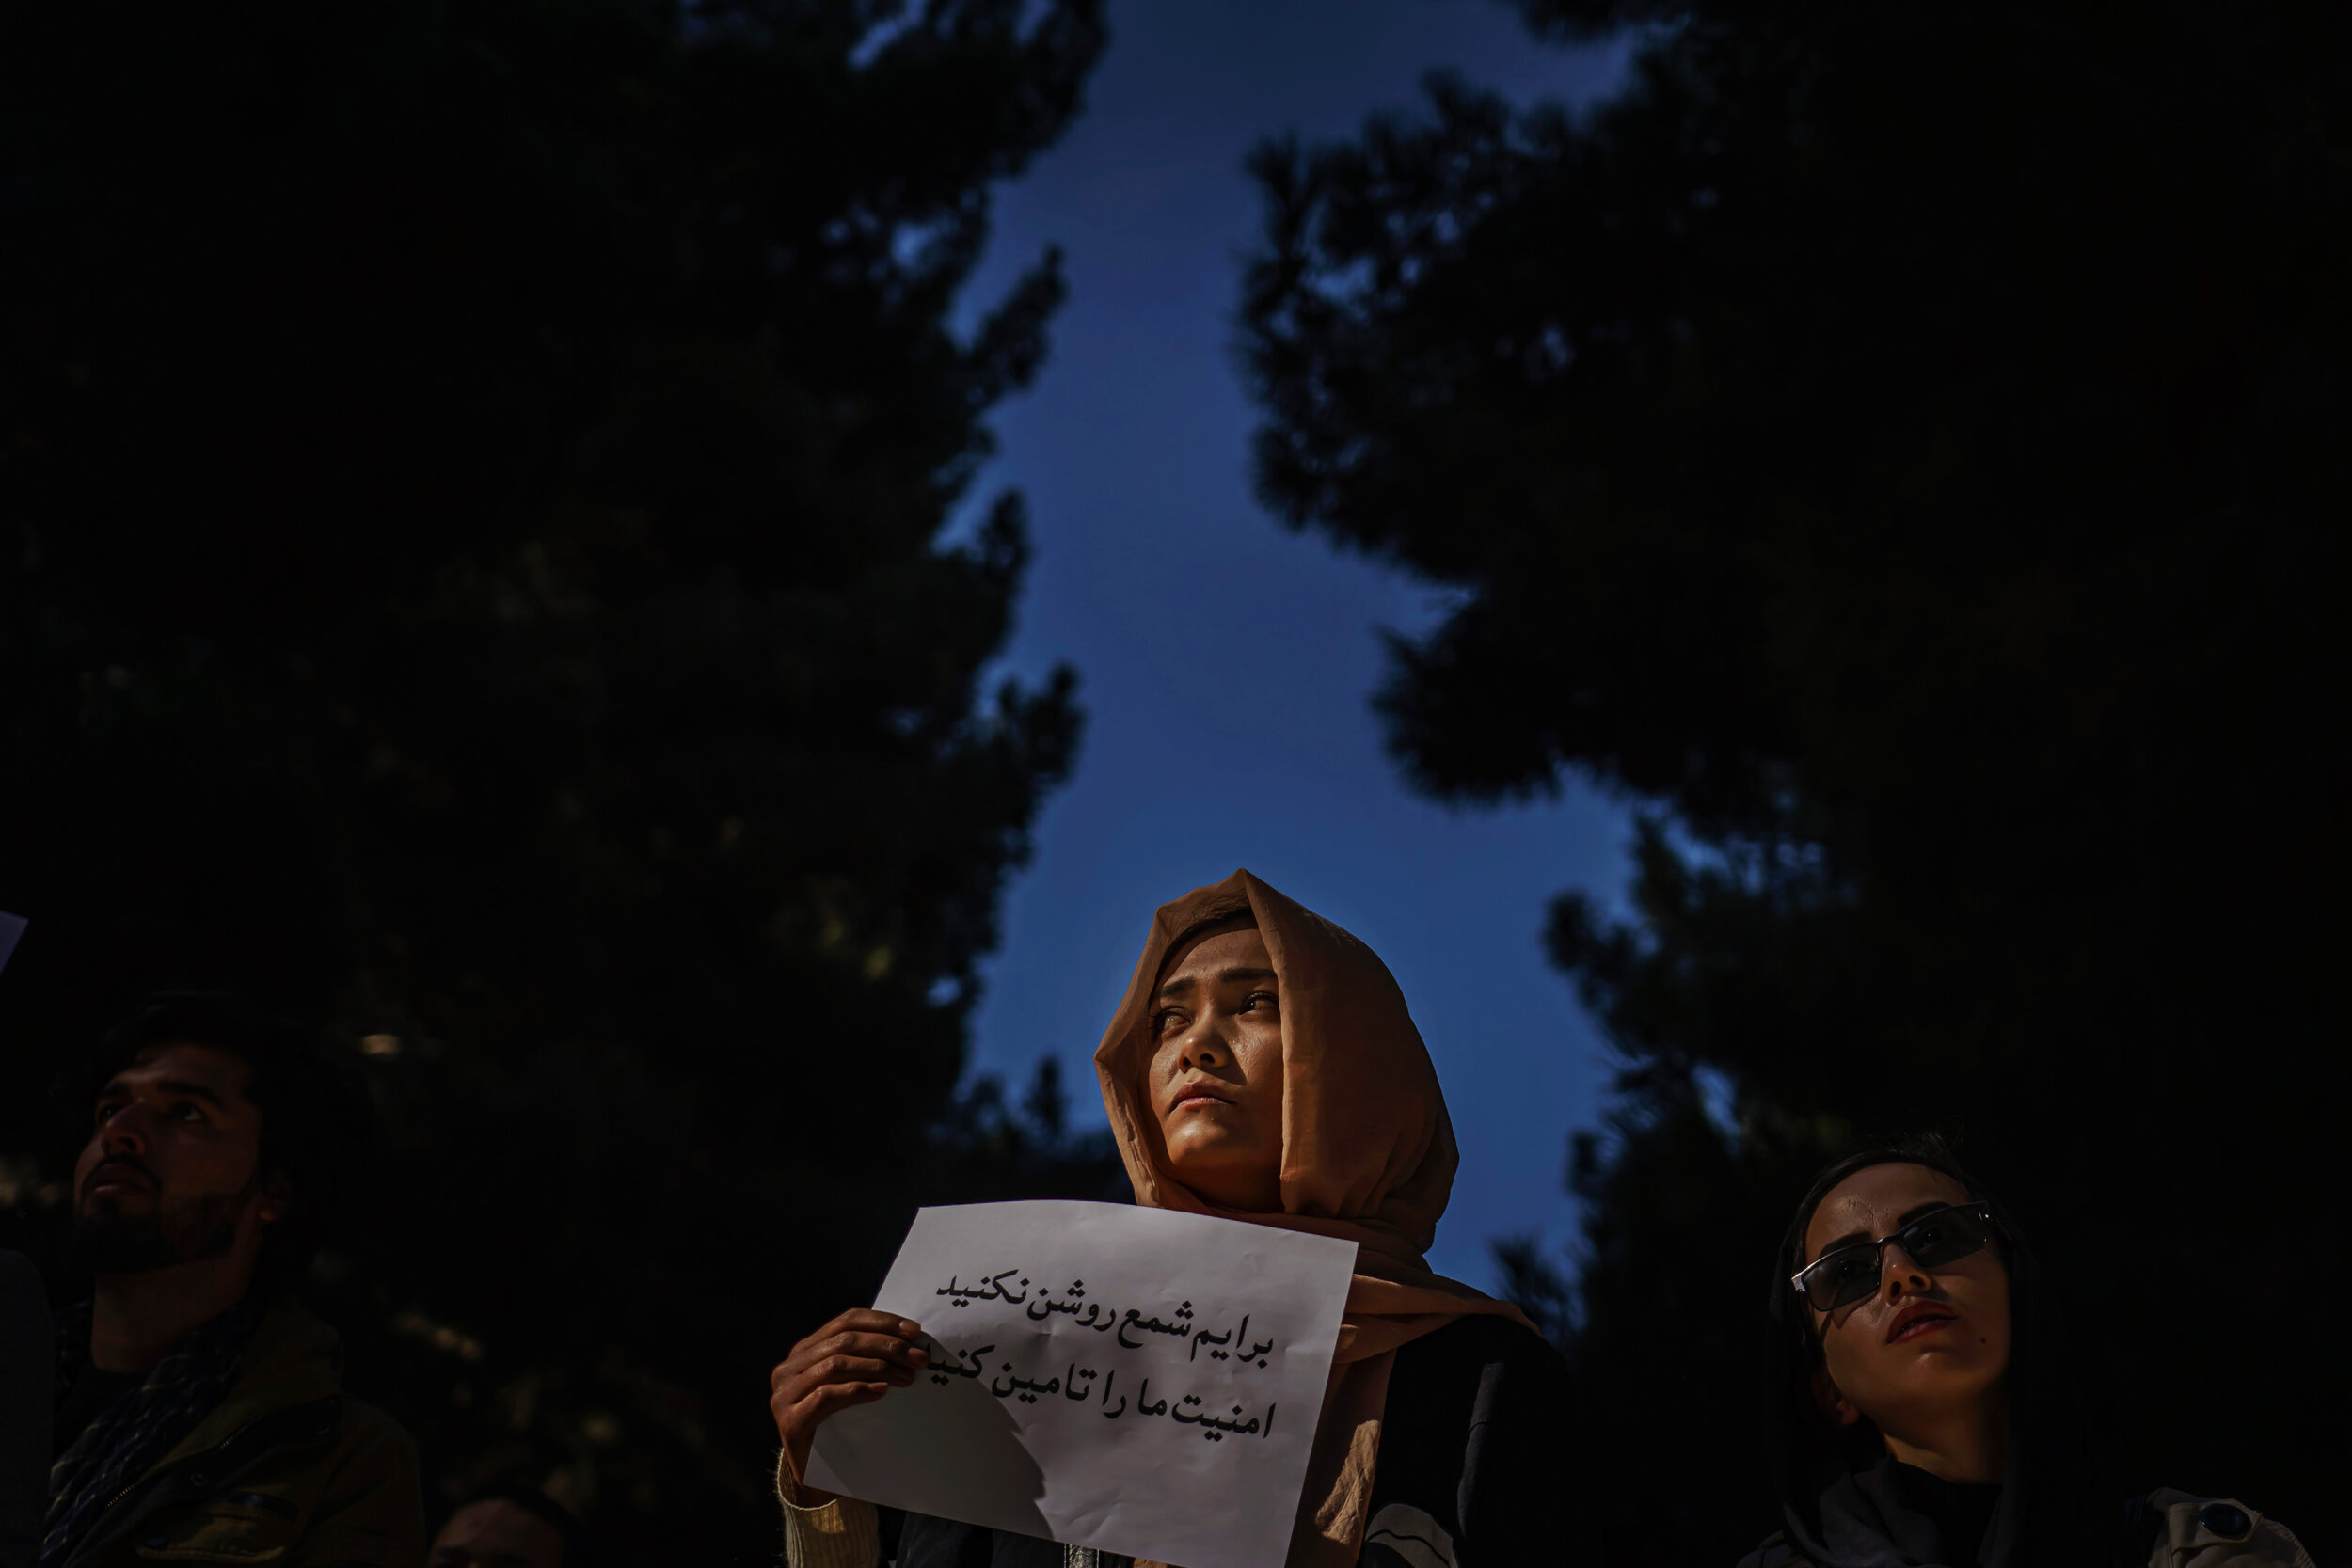  Students protest outside the Pharmacy building to highlight the need to protect public educational institutions and civilians at Kabul University in Kabul, Afghanistan, on Sunday Nov. 8, 2020. This protest was organized by students in response to th